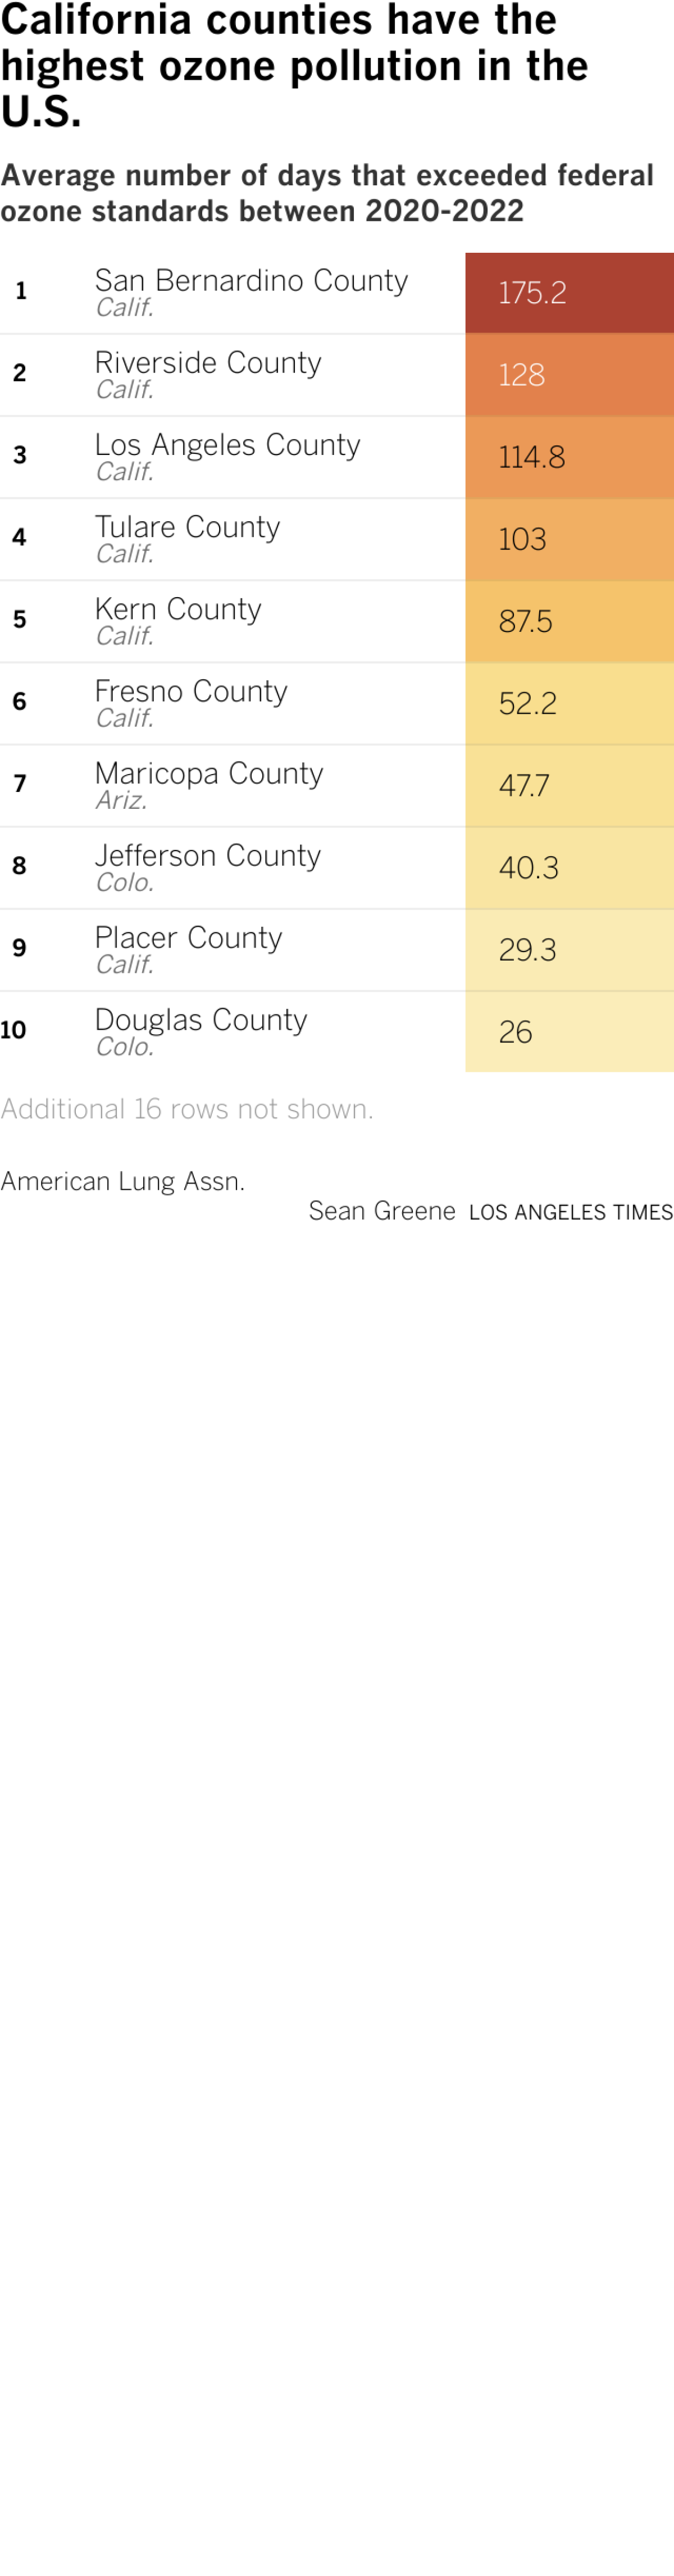 The table lists the 25 counties in the US with the highest ozone pollution.